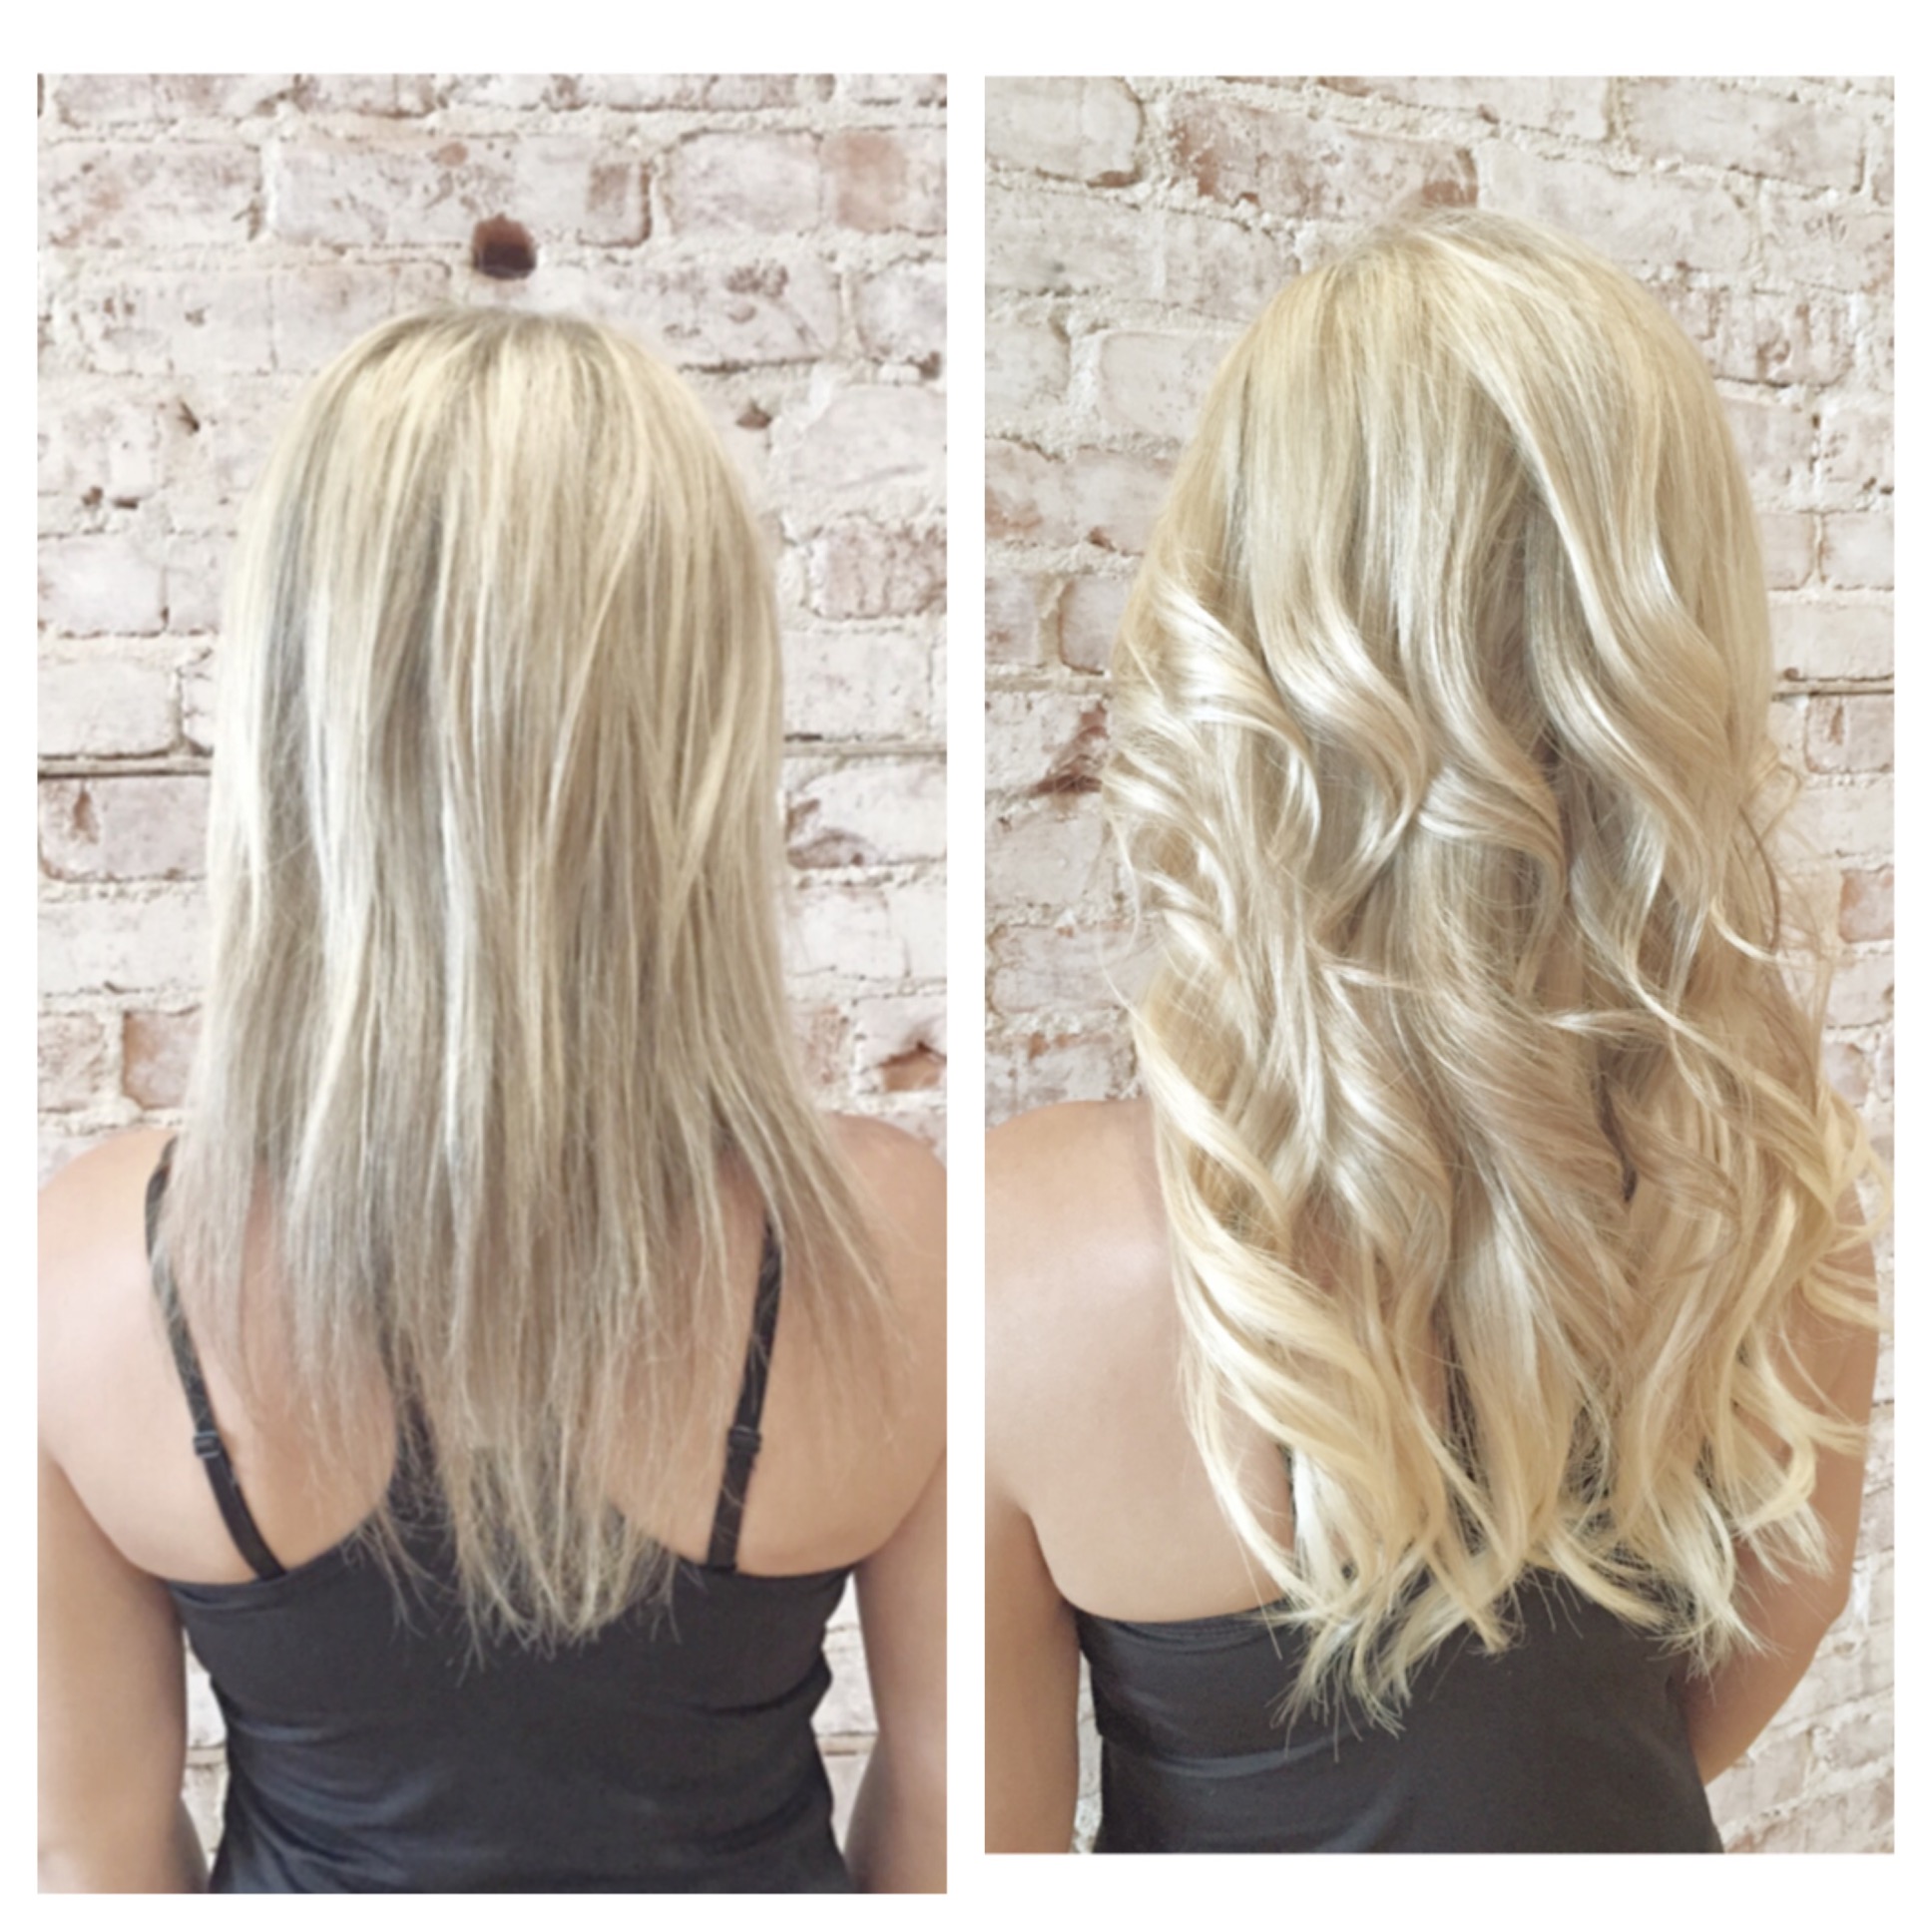 Hair Extensions San Diego - #1 Tape In & Hand Tied Hair Extension Salon